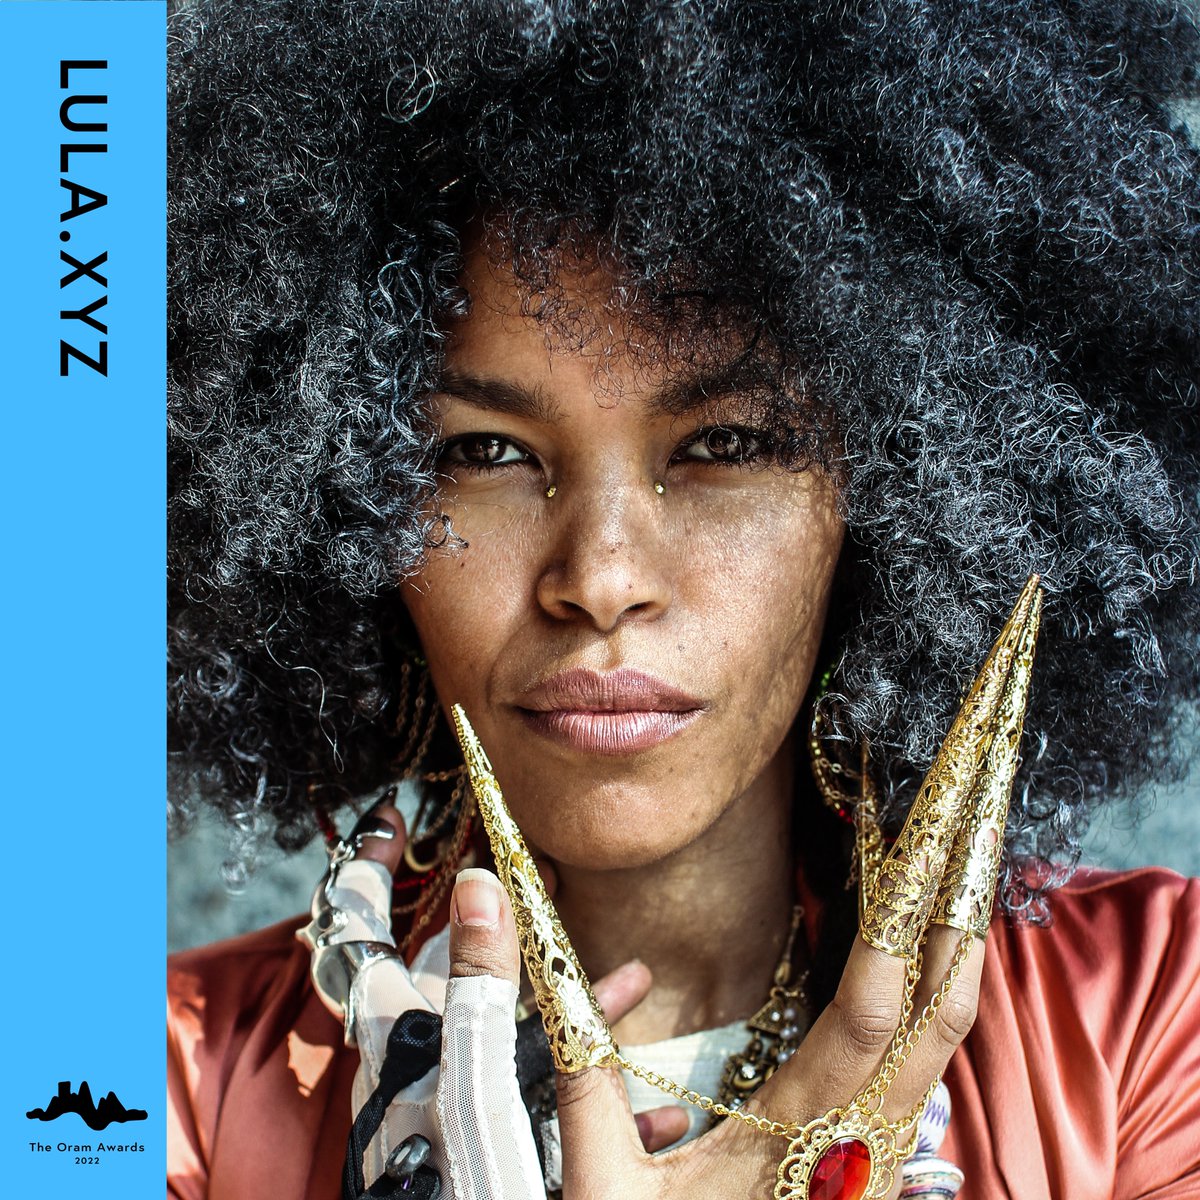 “The Oram Awards carved out a space for us, a home; I can’t wait to see what happens next as I sit alongside a cohort of women who colour outside the box undefined by convention.” @lulamebrahtu aka Lula.xyz, 2022 Oram Awards Winner